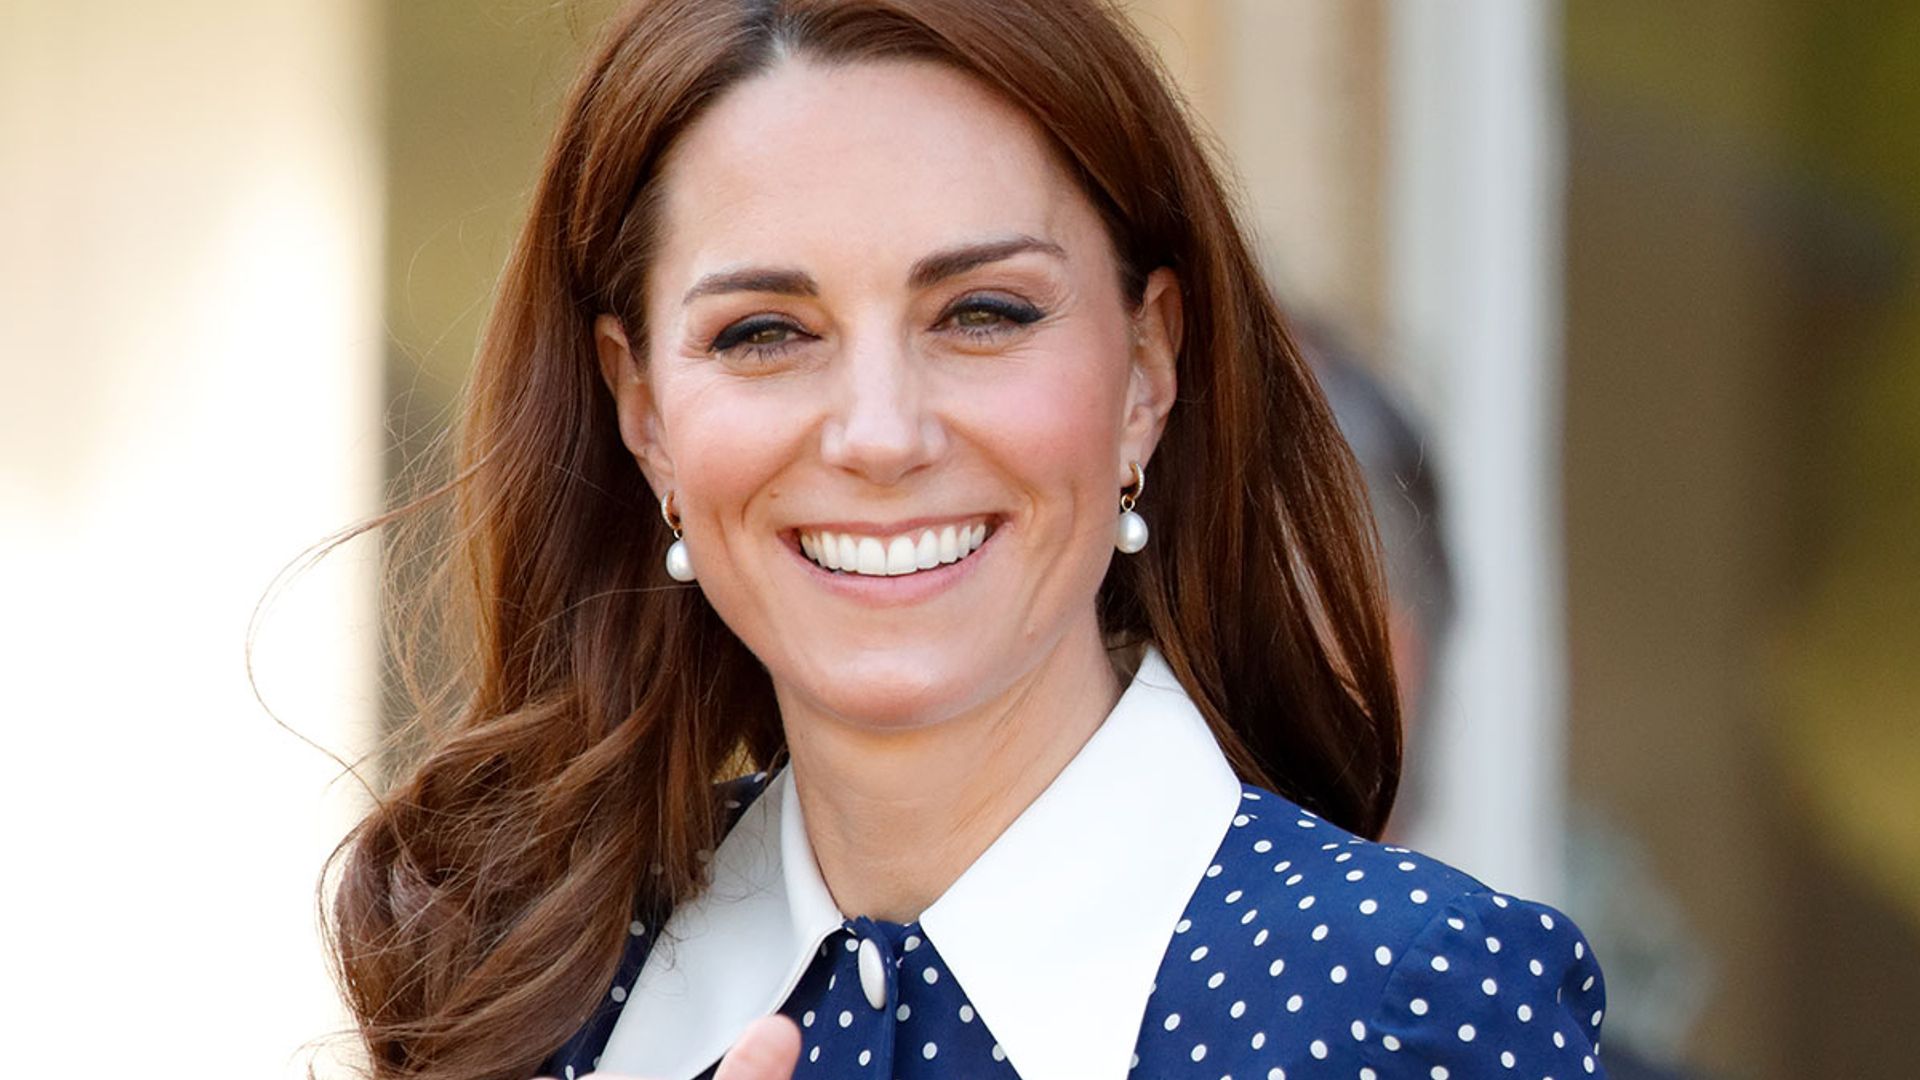 This £8.99 detachable collar will create Kate Middleton-style outfits in moments